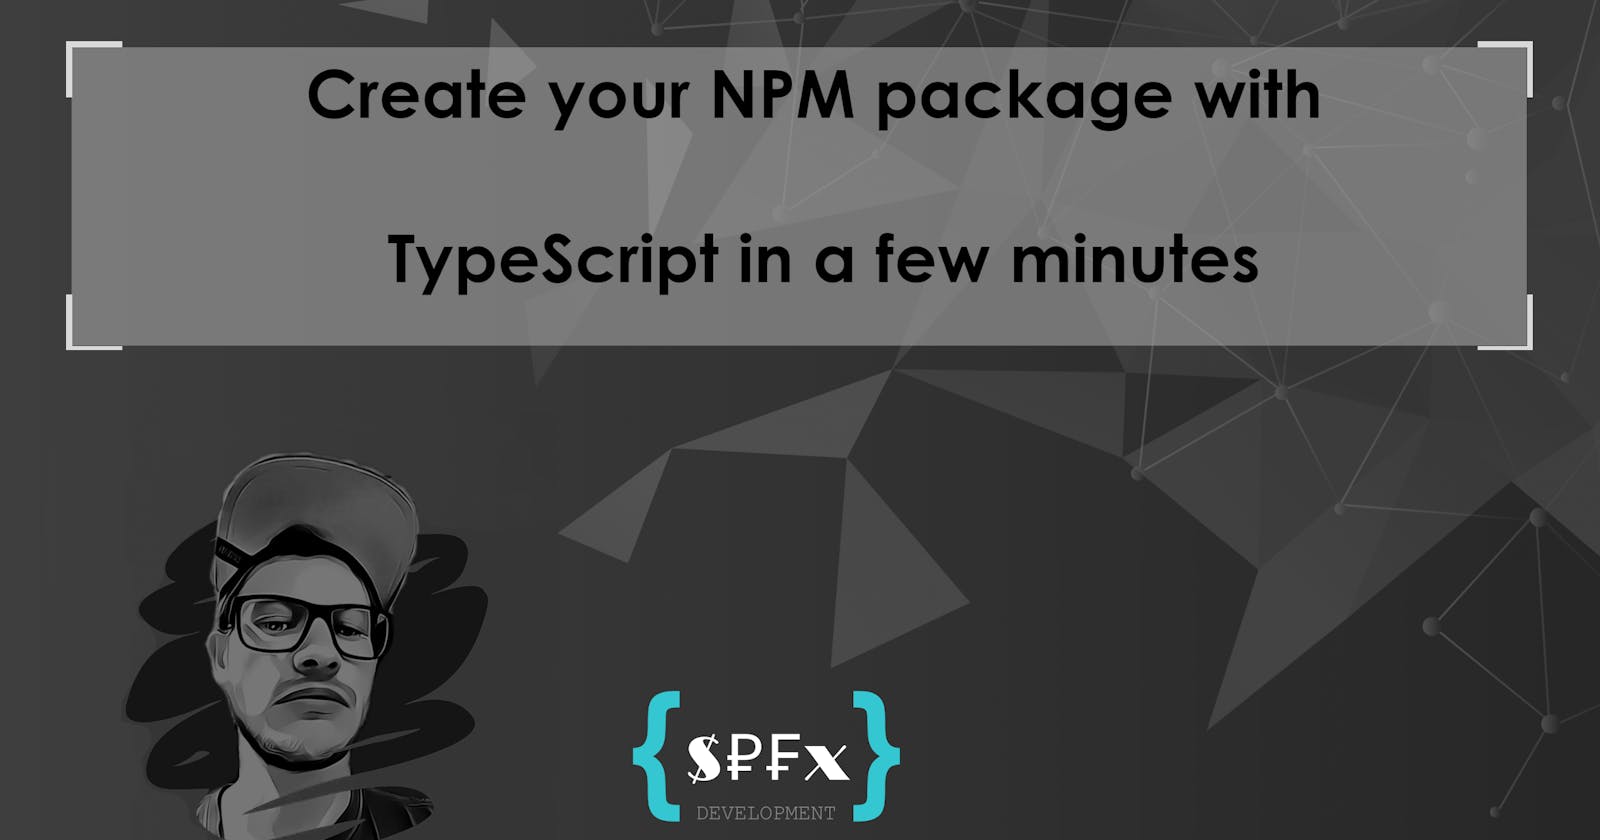 Create your NPM package with TypeScript in a few minutes